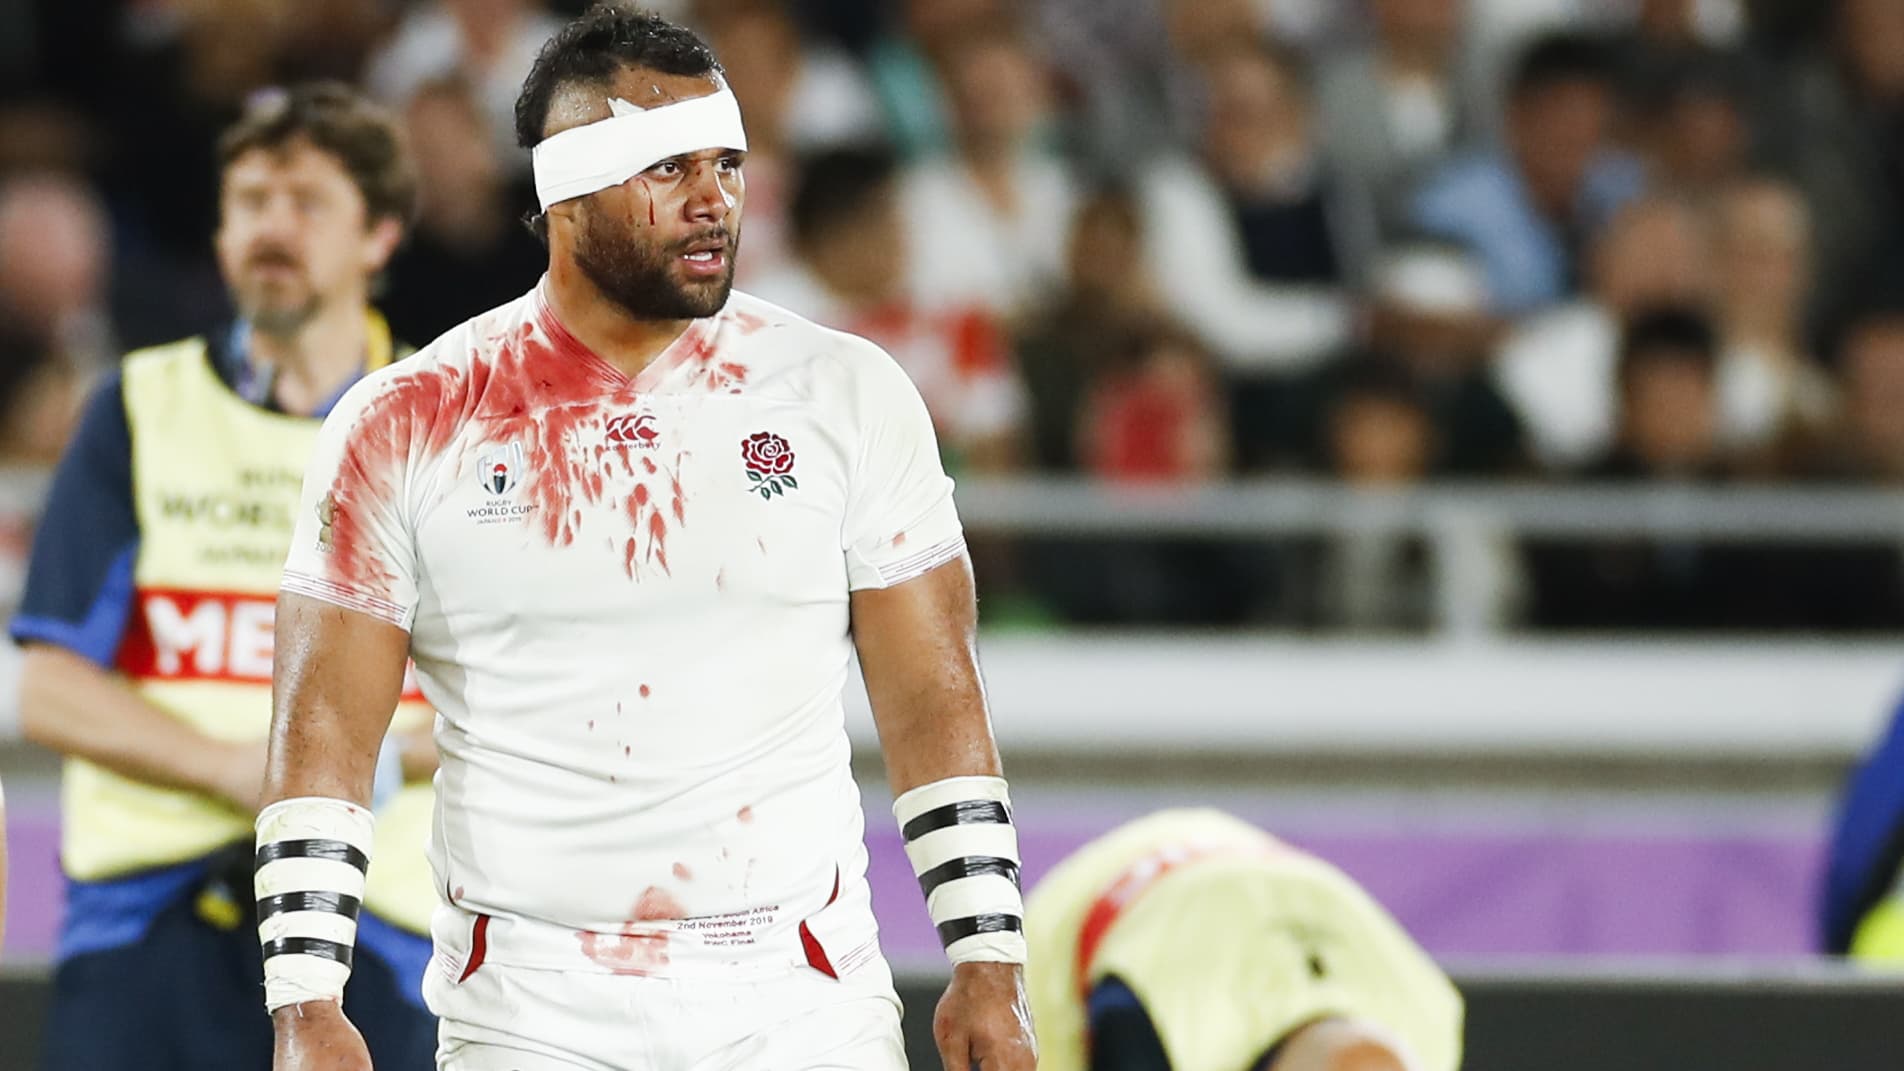 Arrested With Two Taser Shots In Bar, Vunipola Admits ‘Don’t Know When To Stop’ When Drinking